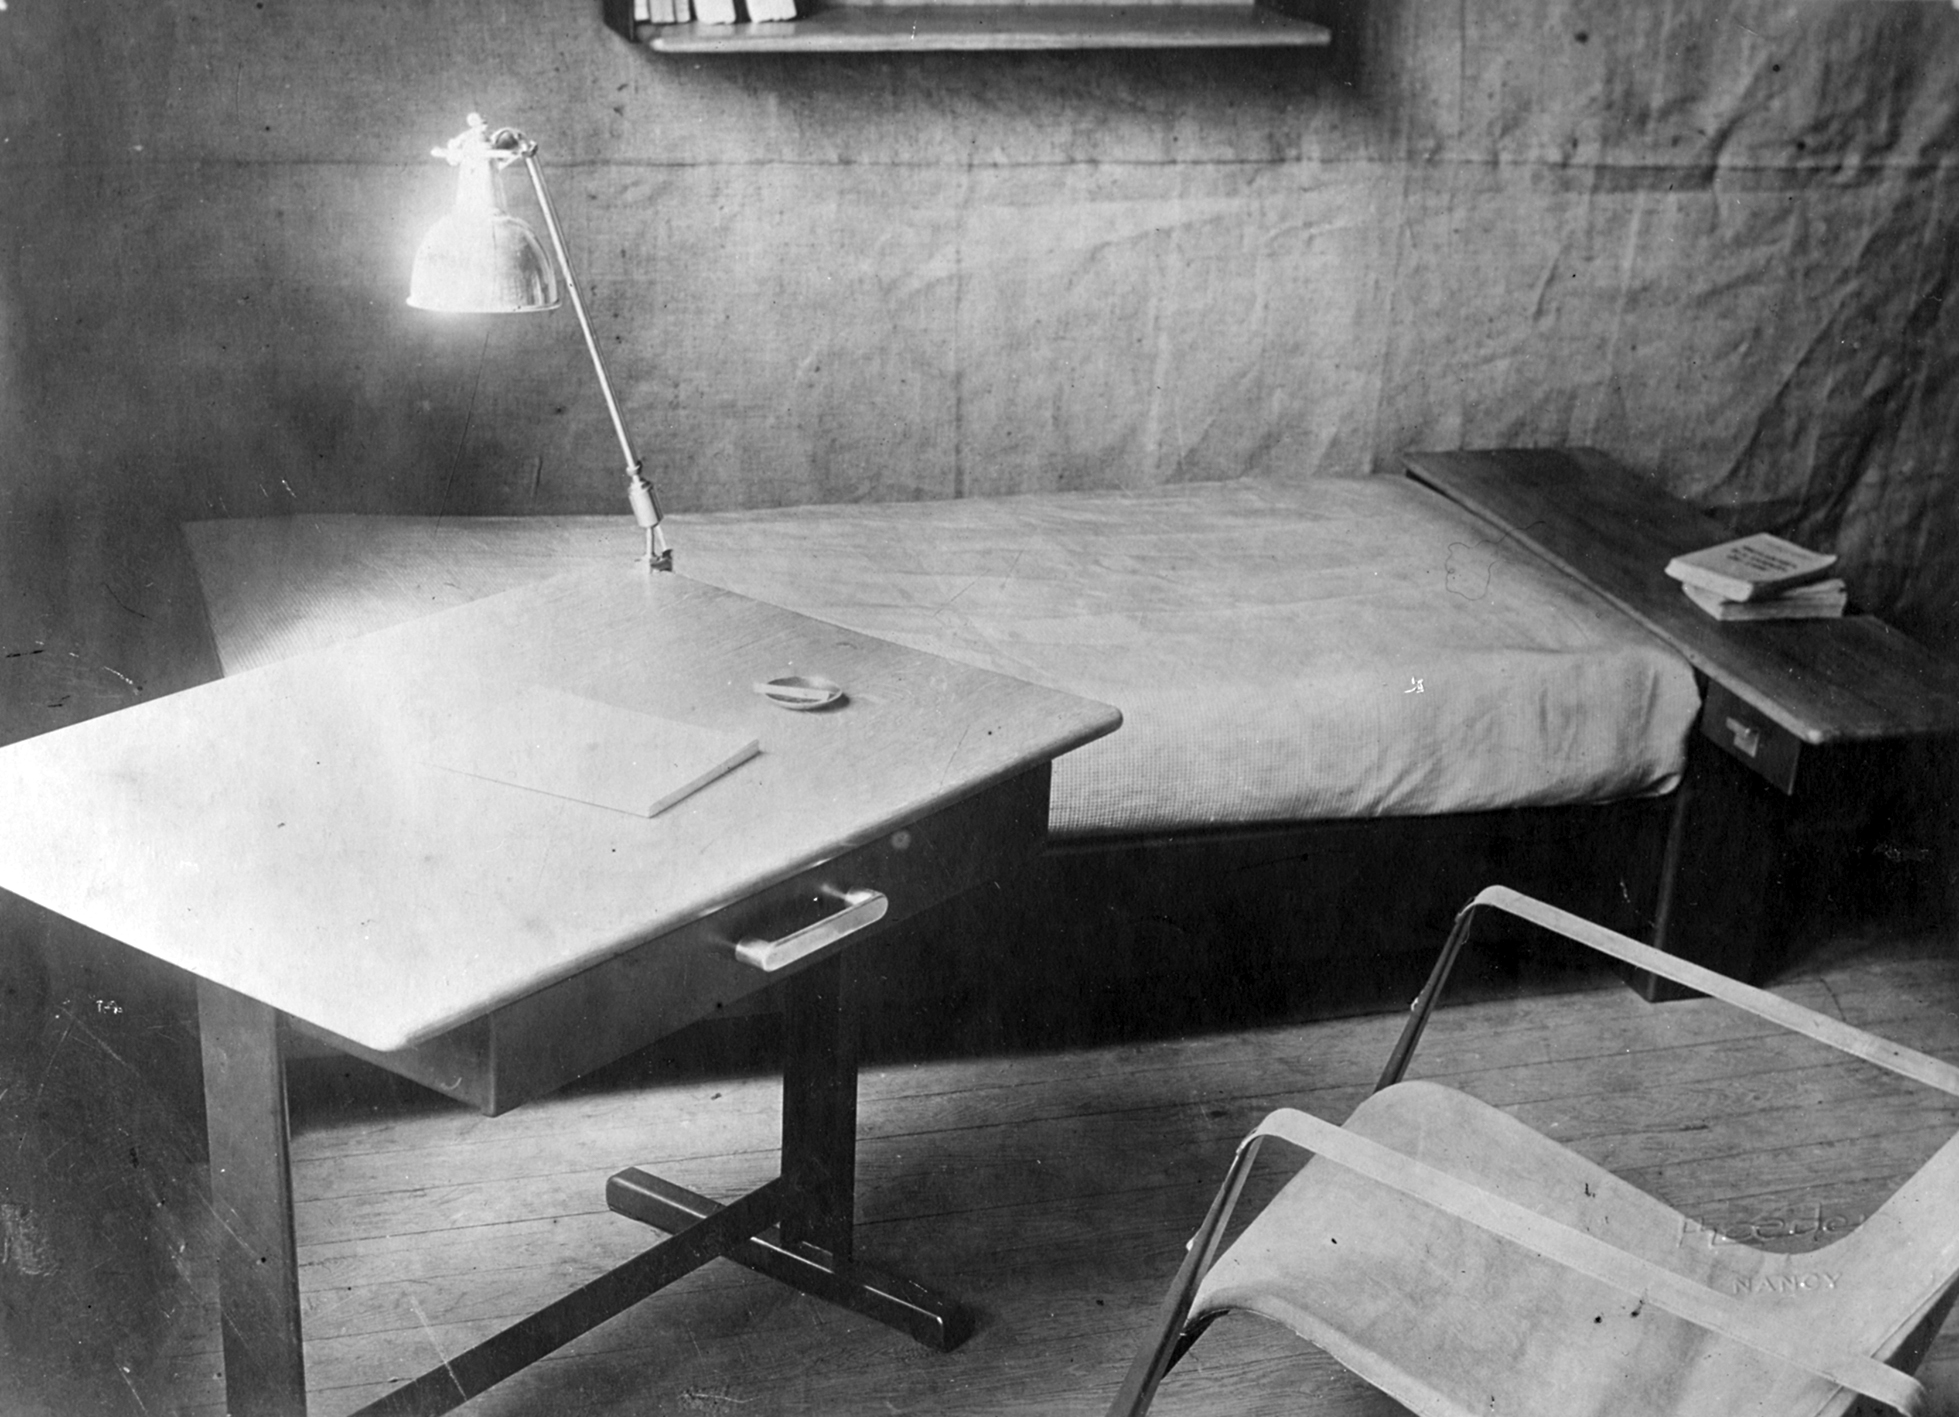 Prototype of a dormitory room presented for the competition for the furnishings of the Cité Universitaire in Nancy, ca. 1930: Cité armchair, bed and table.